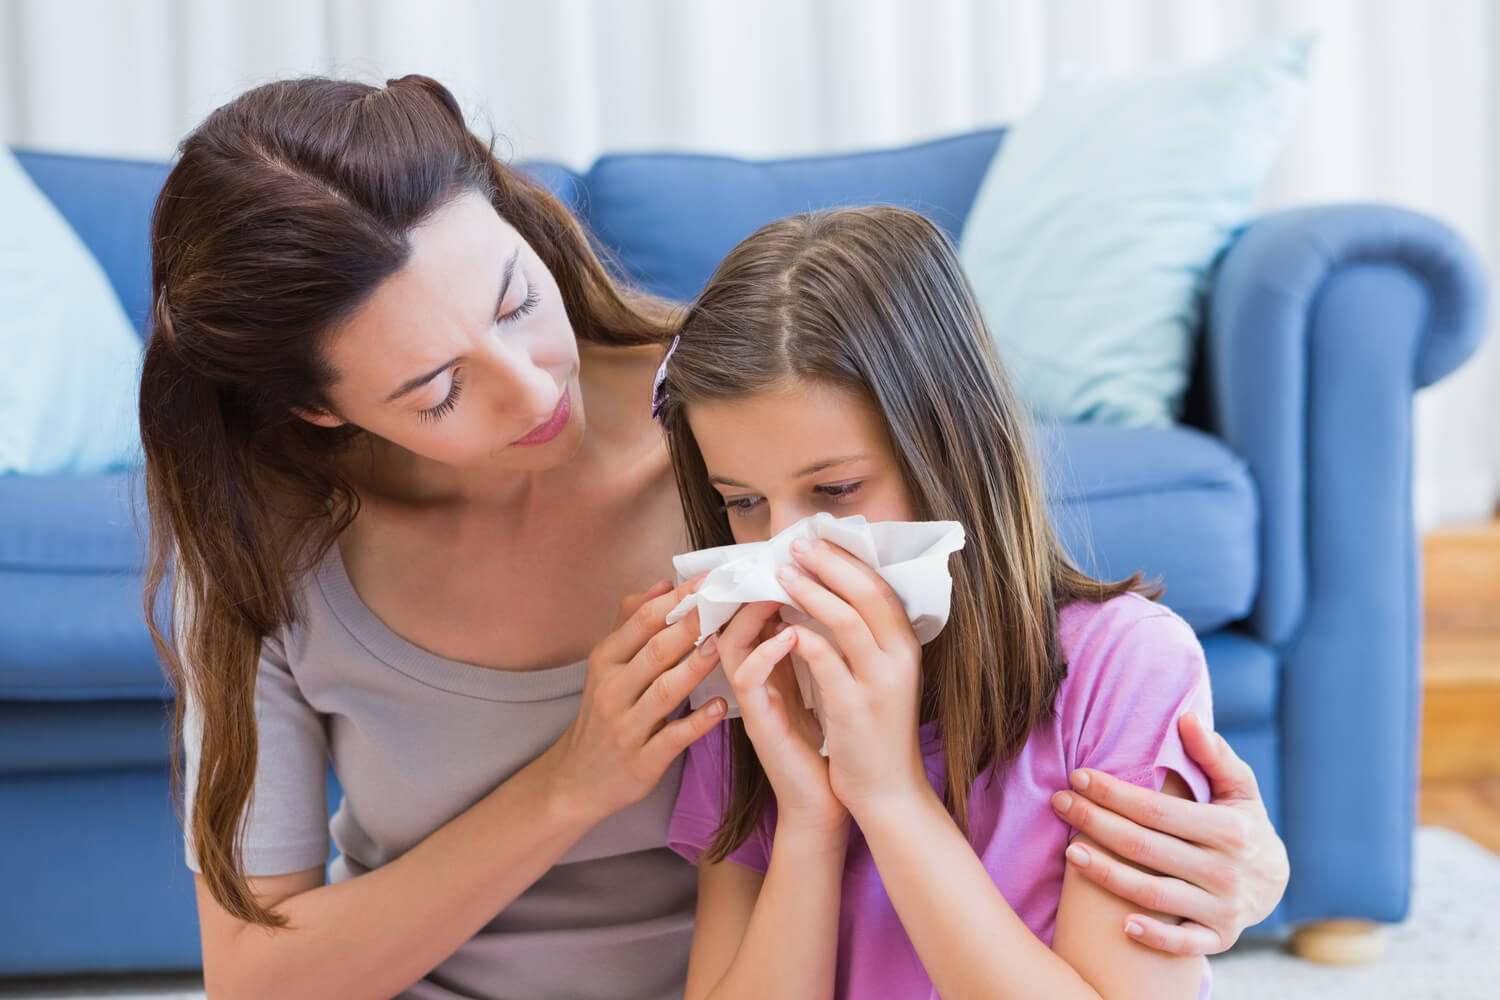 Frequent Colds in My Child – What Should I Do? by Dr. Sagar Bhattad